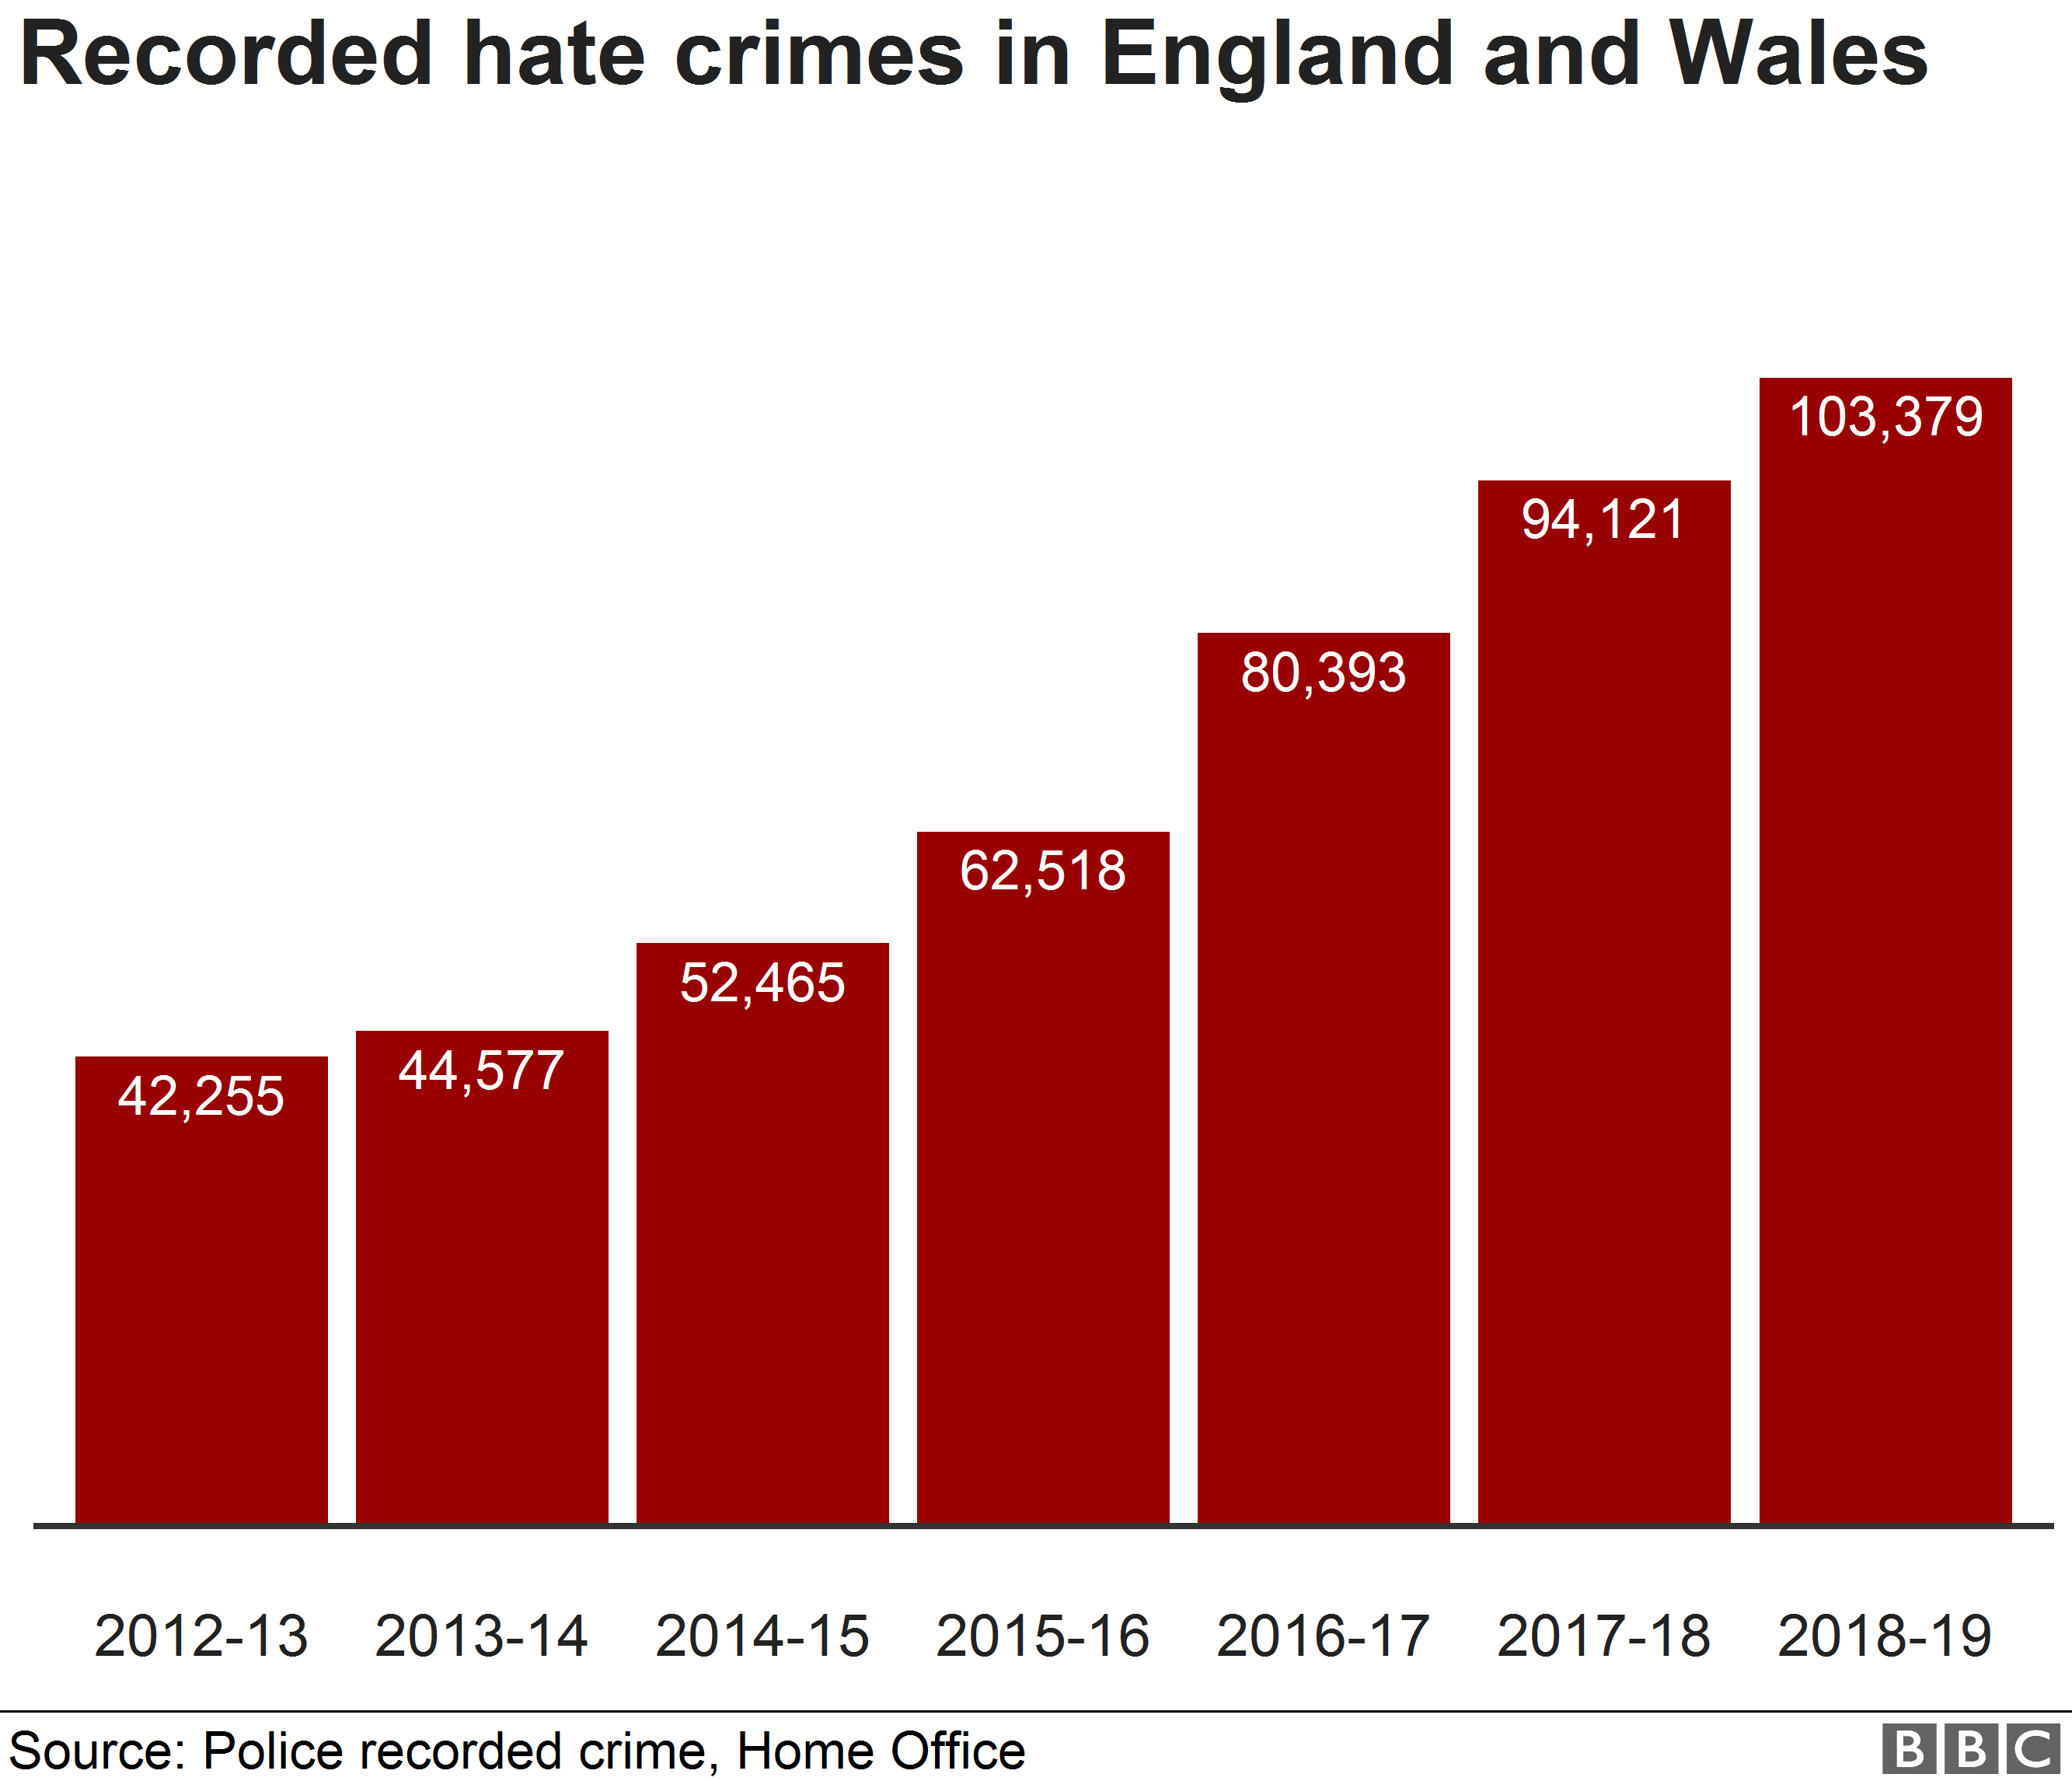 Graph showing the rise in recorded hate crimes over the past seven years